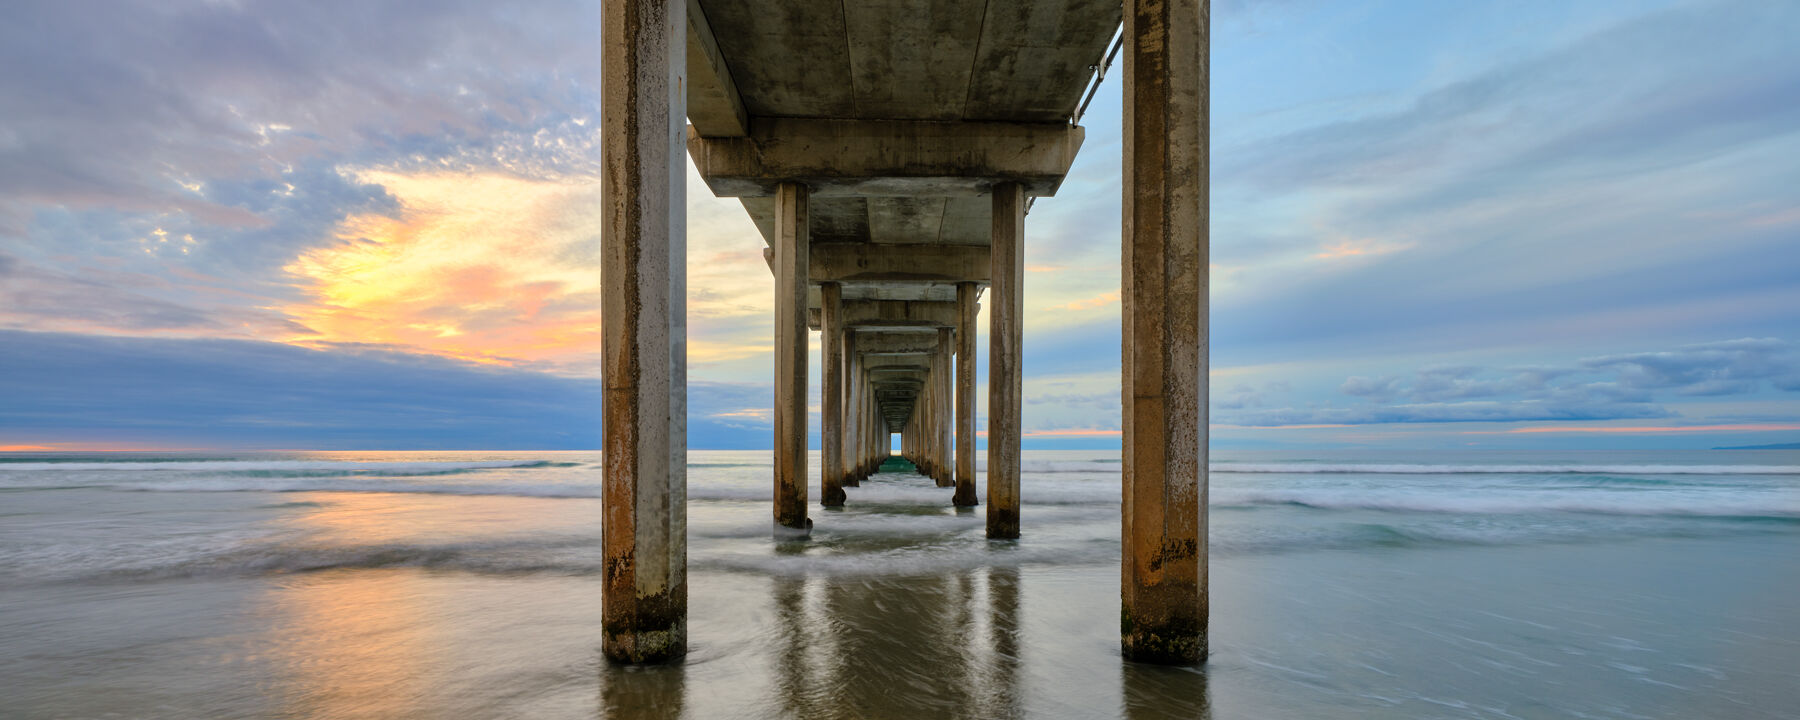 a panoramic image looking down the beautiful Scripps Pier in La Jolla, California.  California Fine Art Landscape photography by Andrew Shoemaker